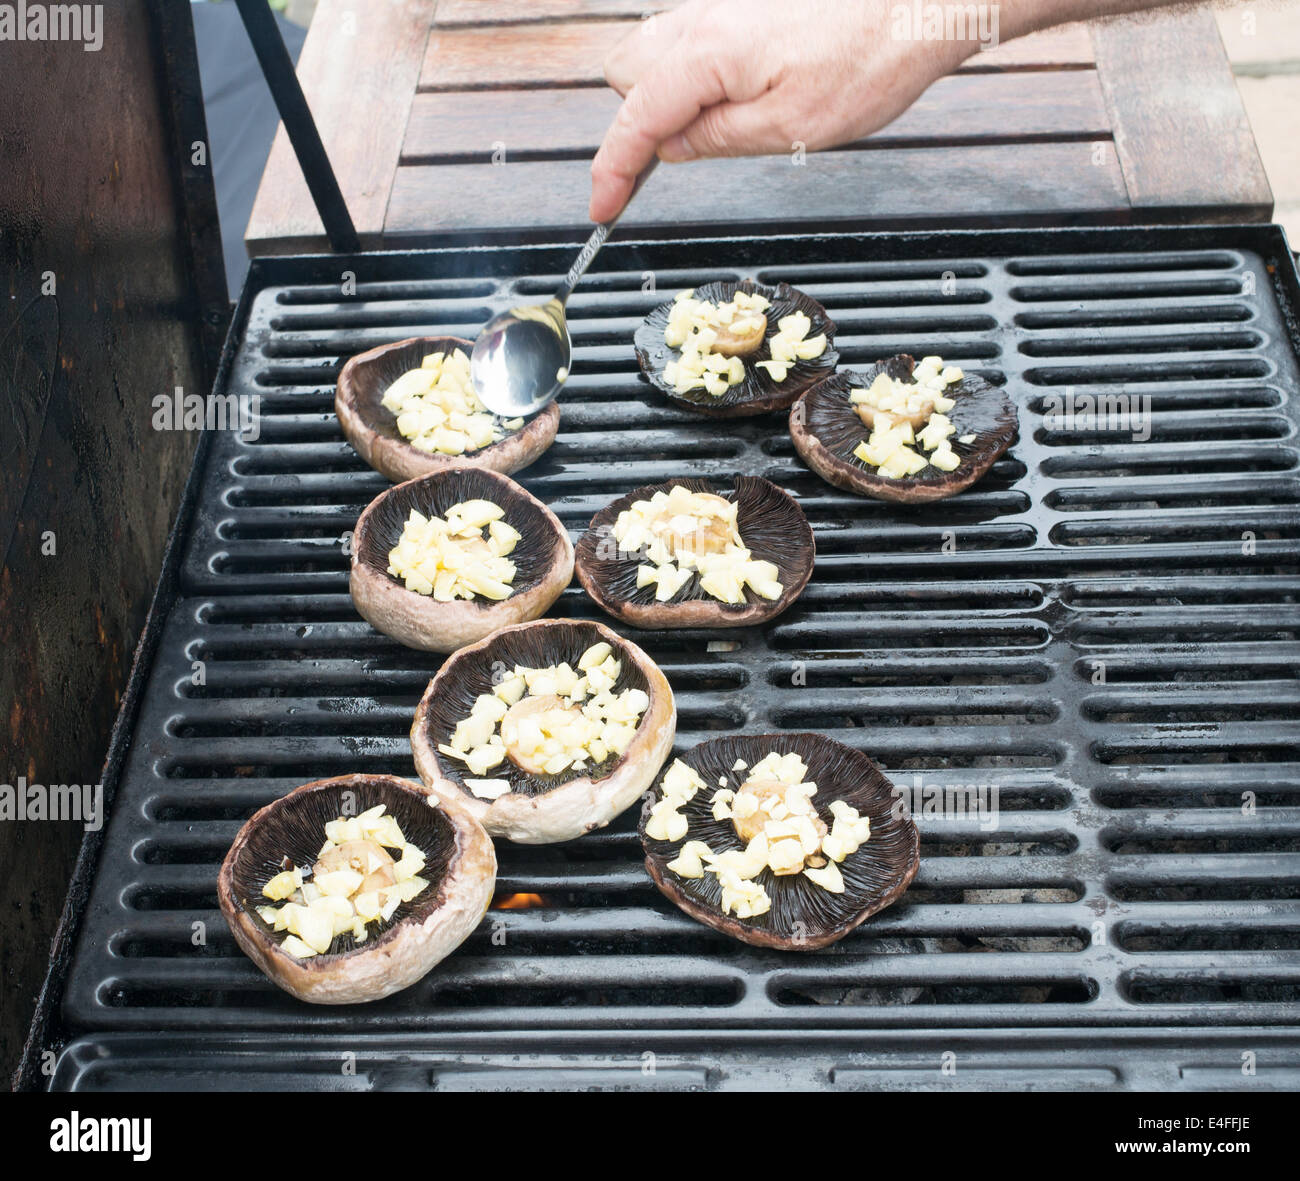 Man barbequeing large mushrooms with garlic using  a gas fired barbeque Stock Photo